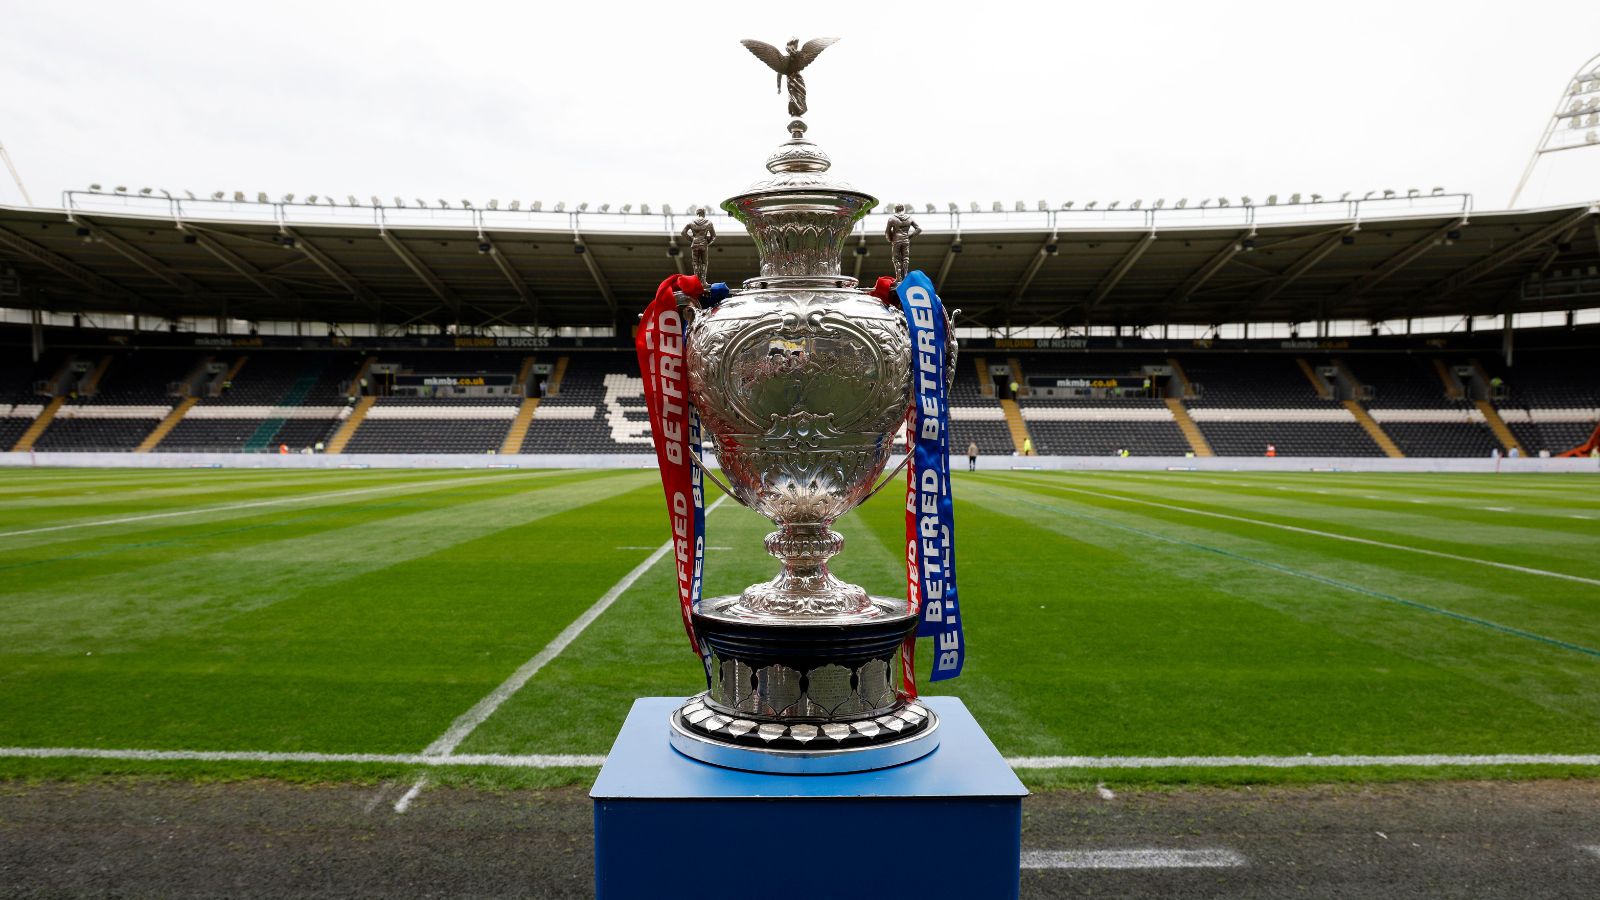 challenge cup fifth round begins to take shape as community club book spot in tomorrow’s draw